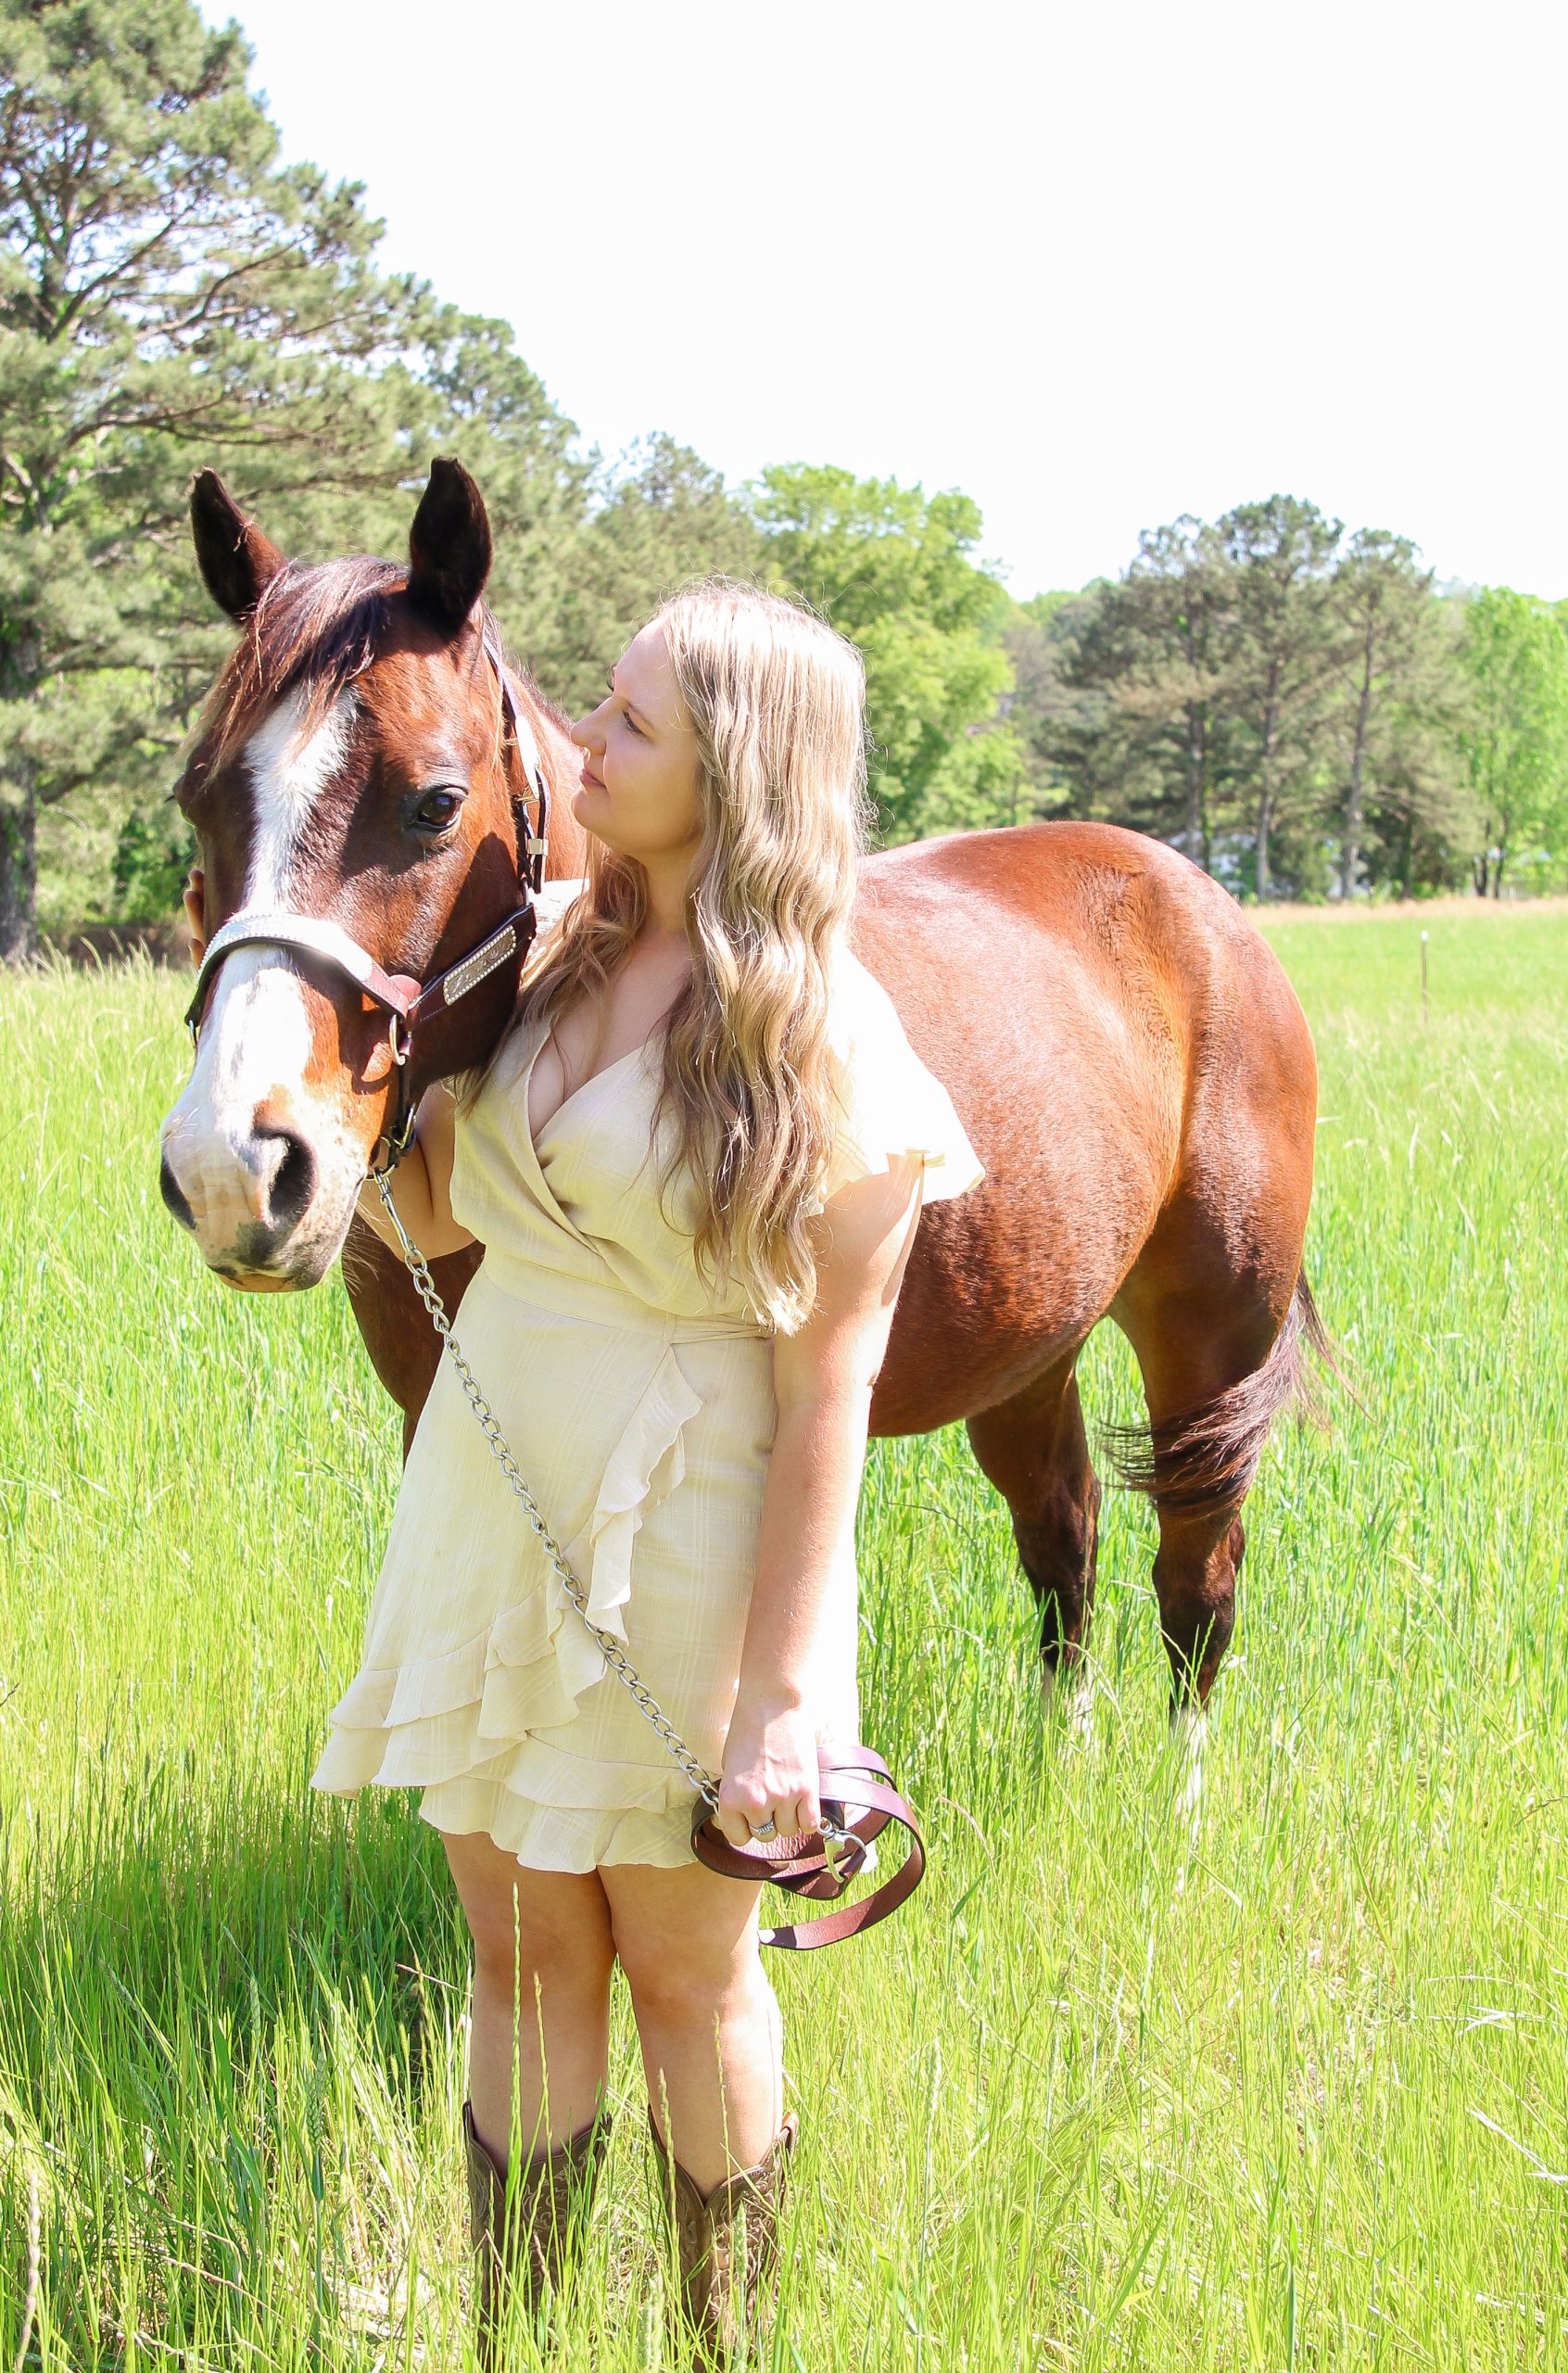 A blonde young woman in a cream colored dress holds the reins of a brown horse with white markings on its face in a field of green grass